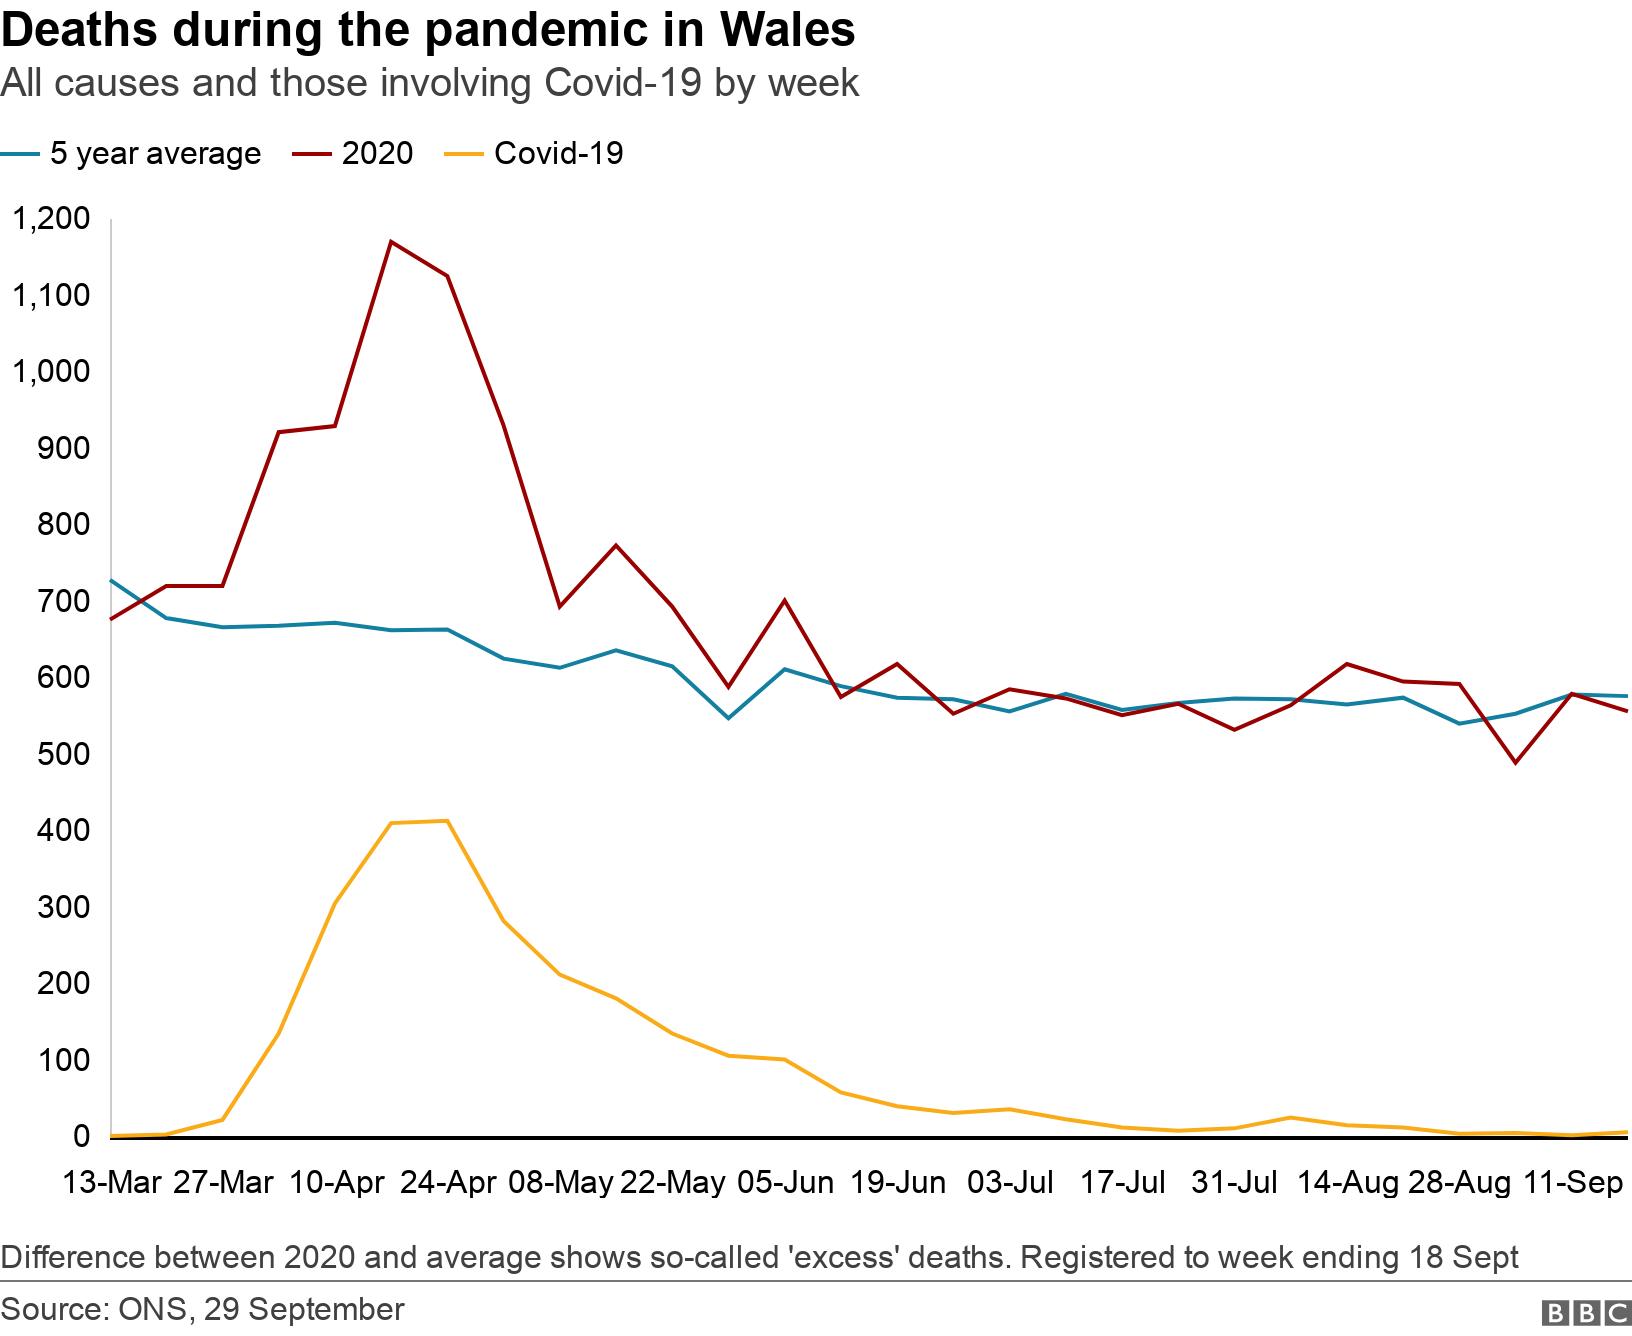 Deaths during the pandemic in Wales. All causes and those involving Covid-19 by week. Difference between 2020 and average shows so-called &#39;excess&#39; deaths. Registered to week ending 18 Sept.